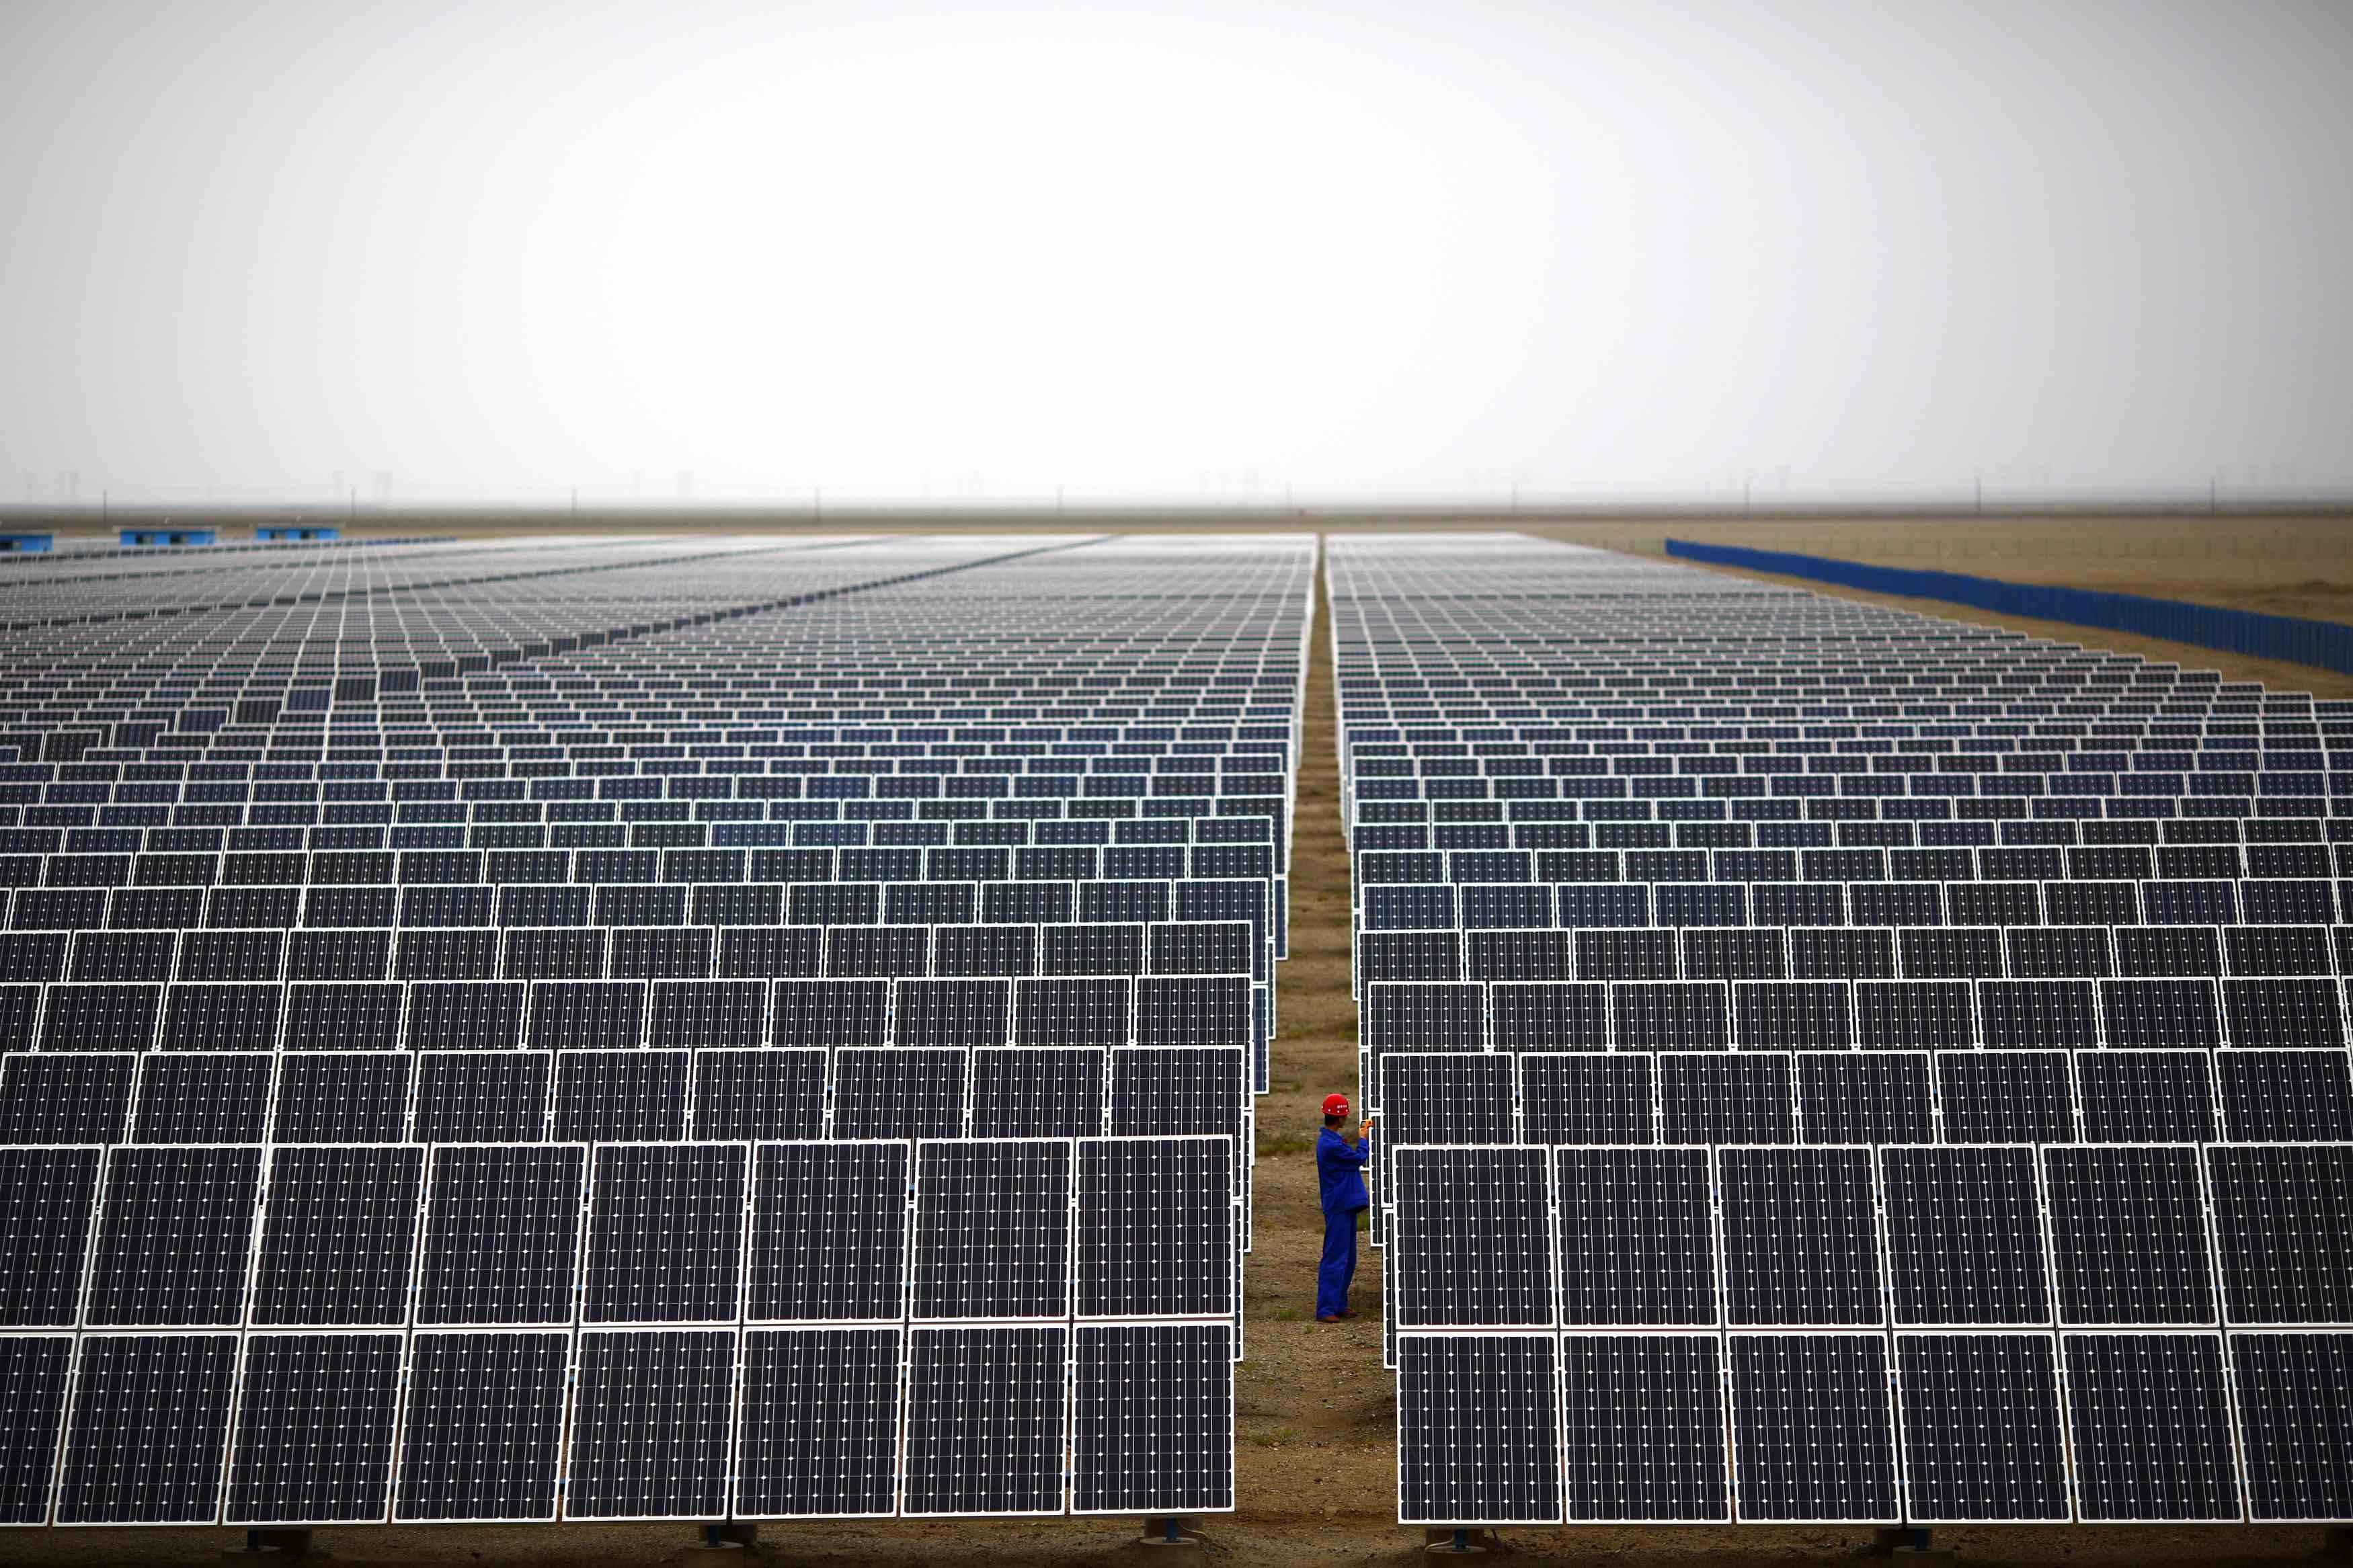 A worker inspects panels at a solar farm in Dunhuang, Gansu province, in 2013. Environmental targets have been incorporated into the country’s economic planning since 2006. Photo: Reuters